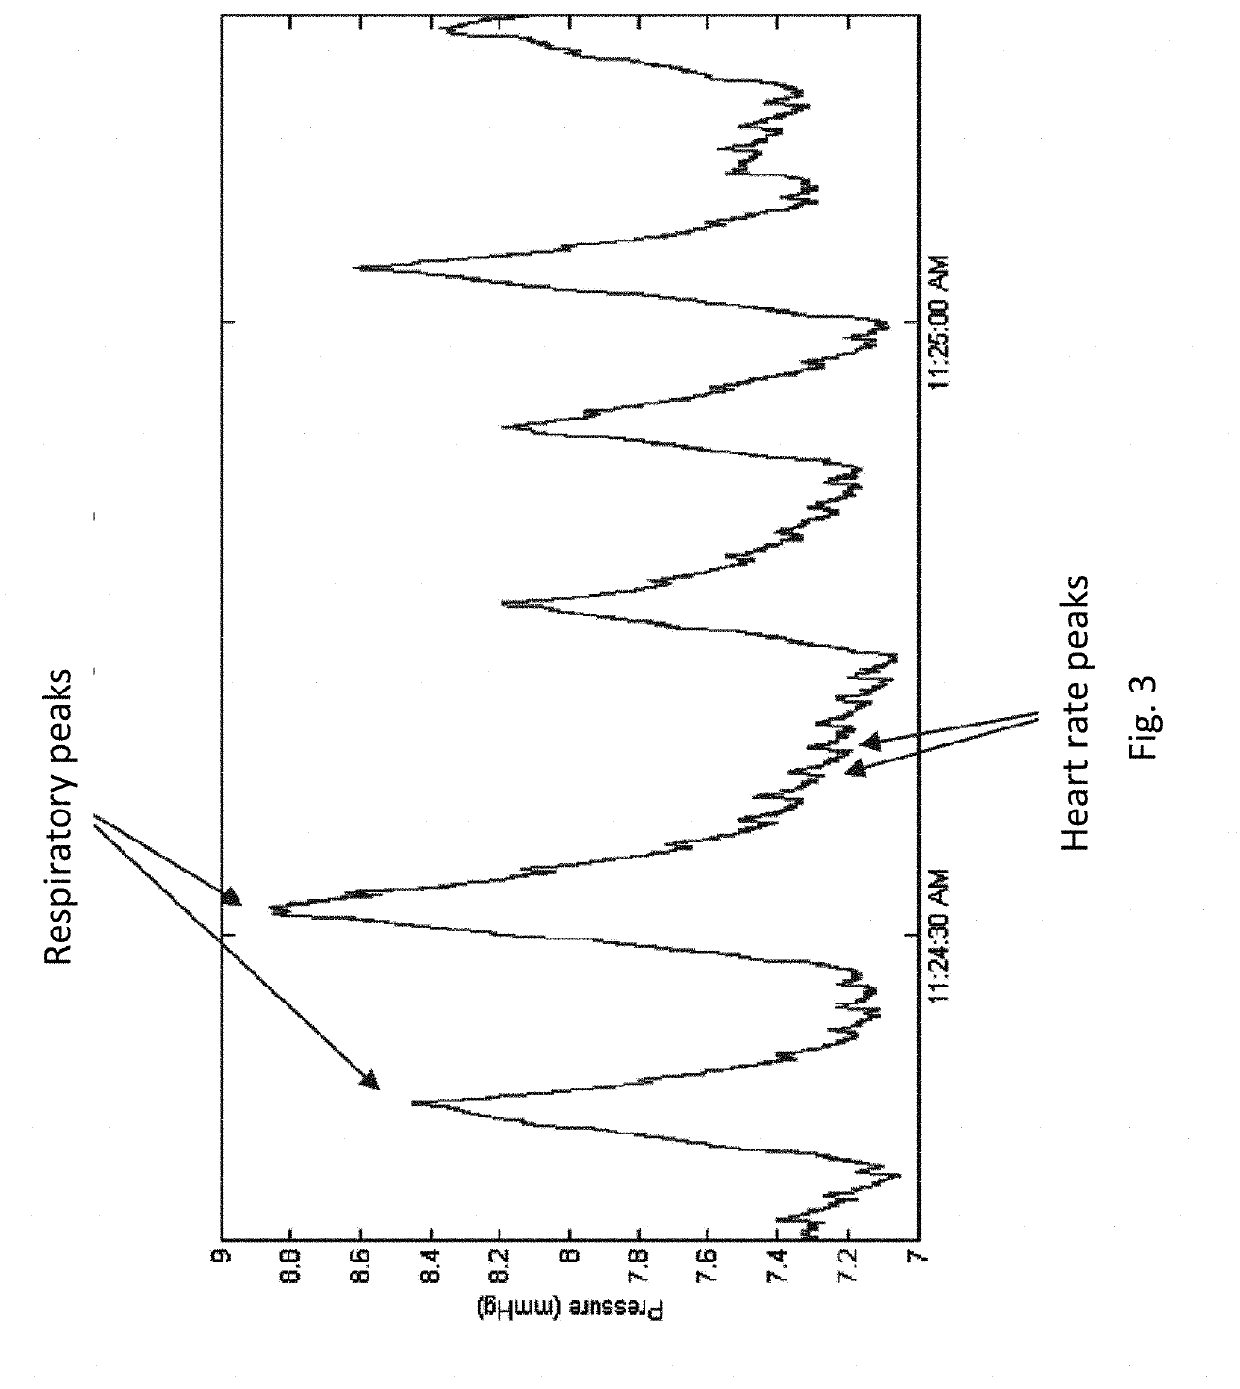 Systems, devices and methods for draining and analyzing bodily fluids